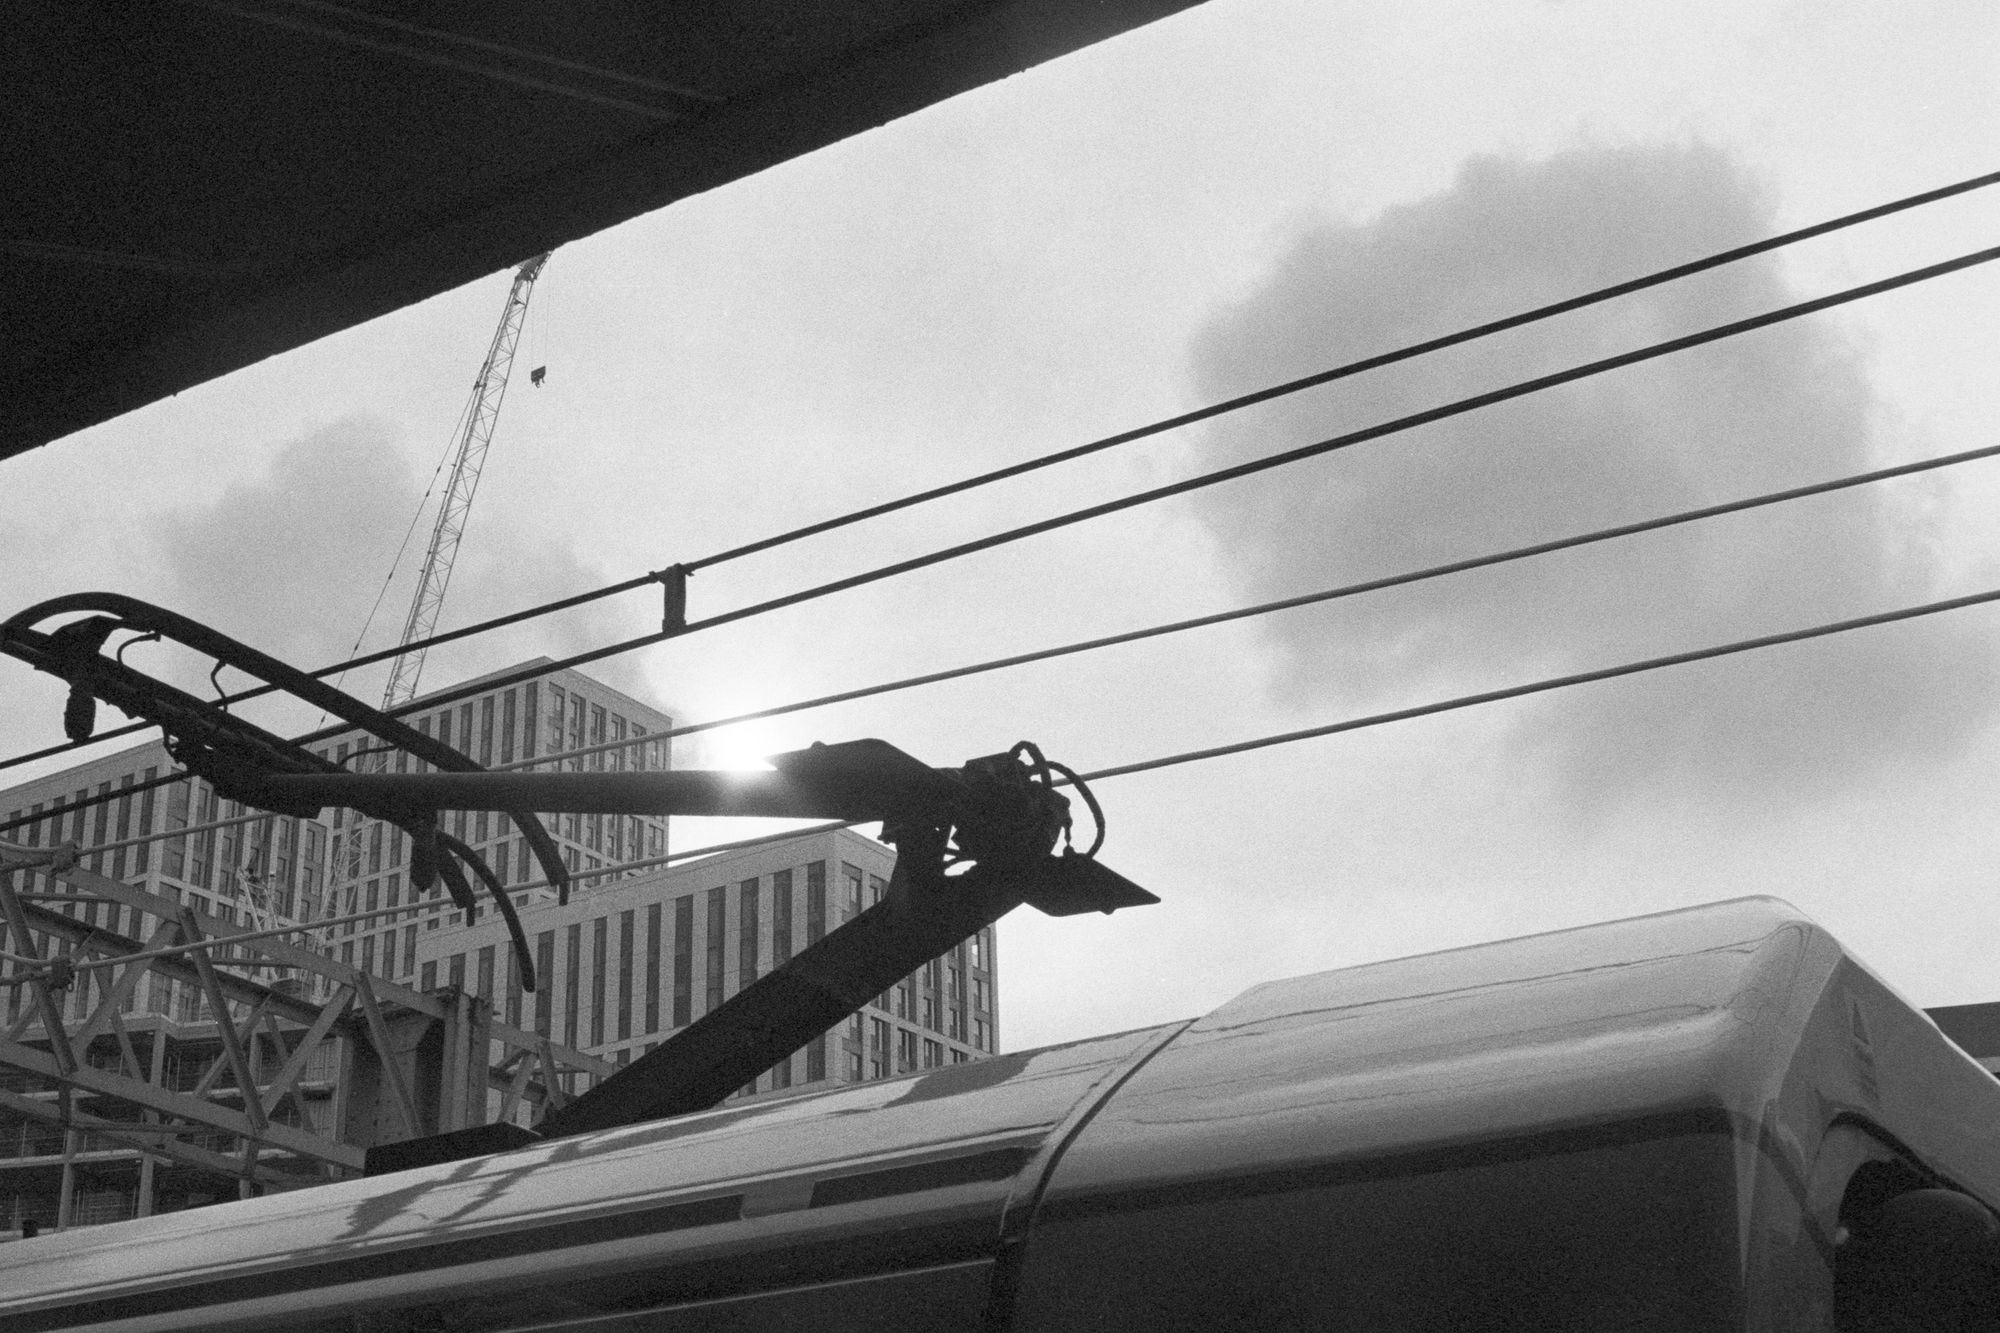 From a railway station platform, the gap between the platform canopy and the roof of an electric train. The pantograph is sprung into contact with the overhead electrical wires, through which the sun snaps through the clouds. In the distance, we see medium- and high-rise tower blocks of flats that look like cheaply constructed and architecturally non-descript cuboids, and an overhead gantry for the railway line.